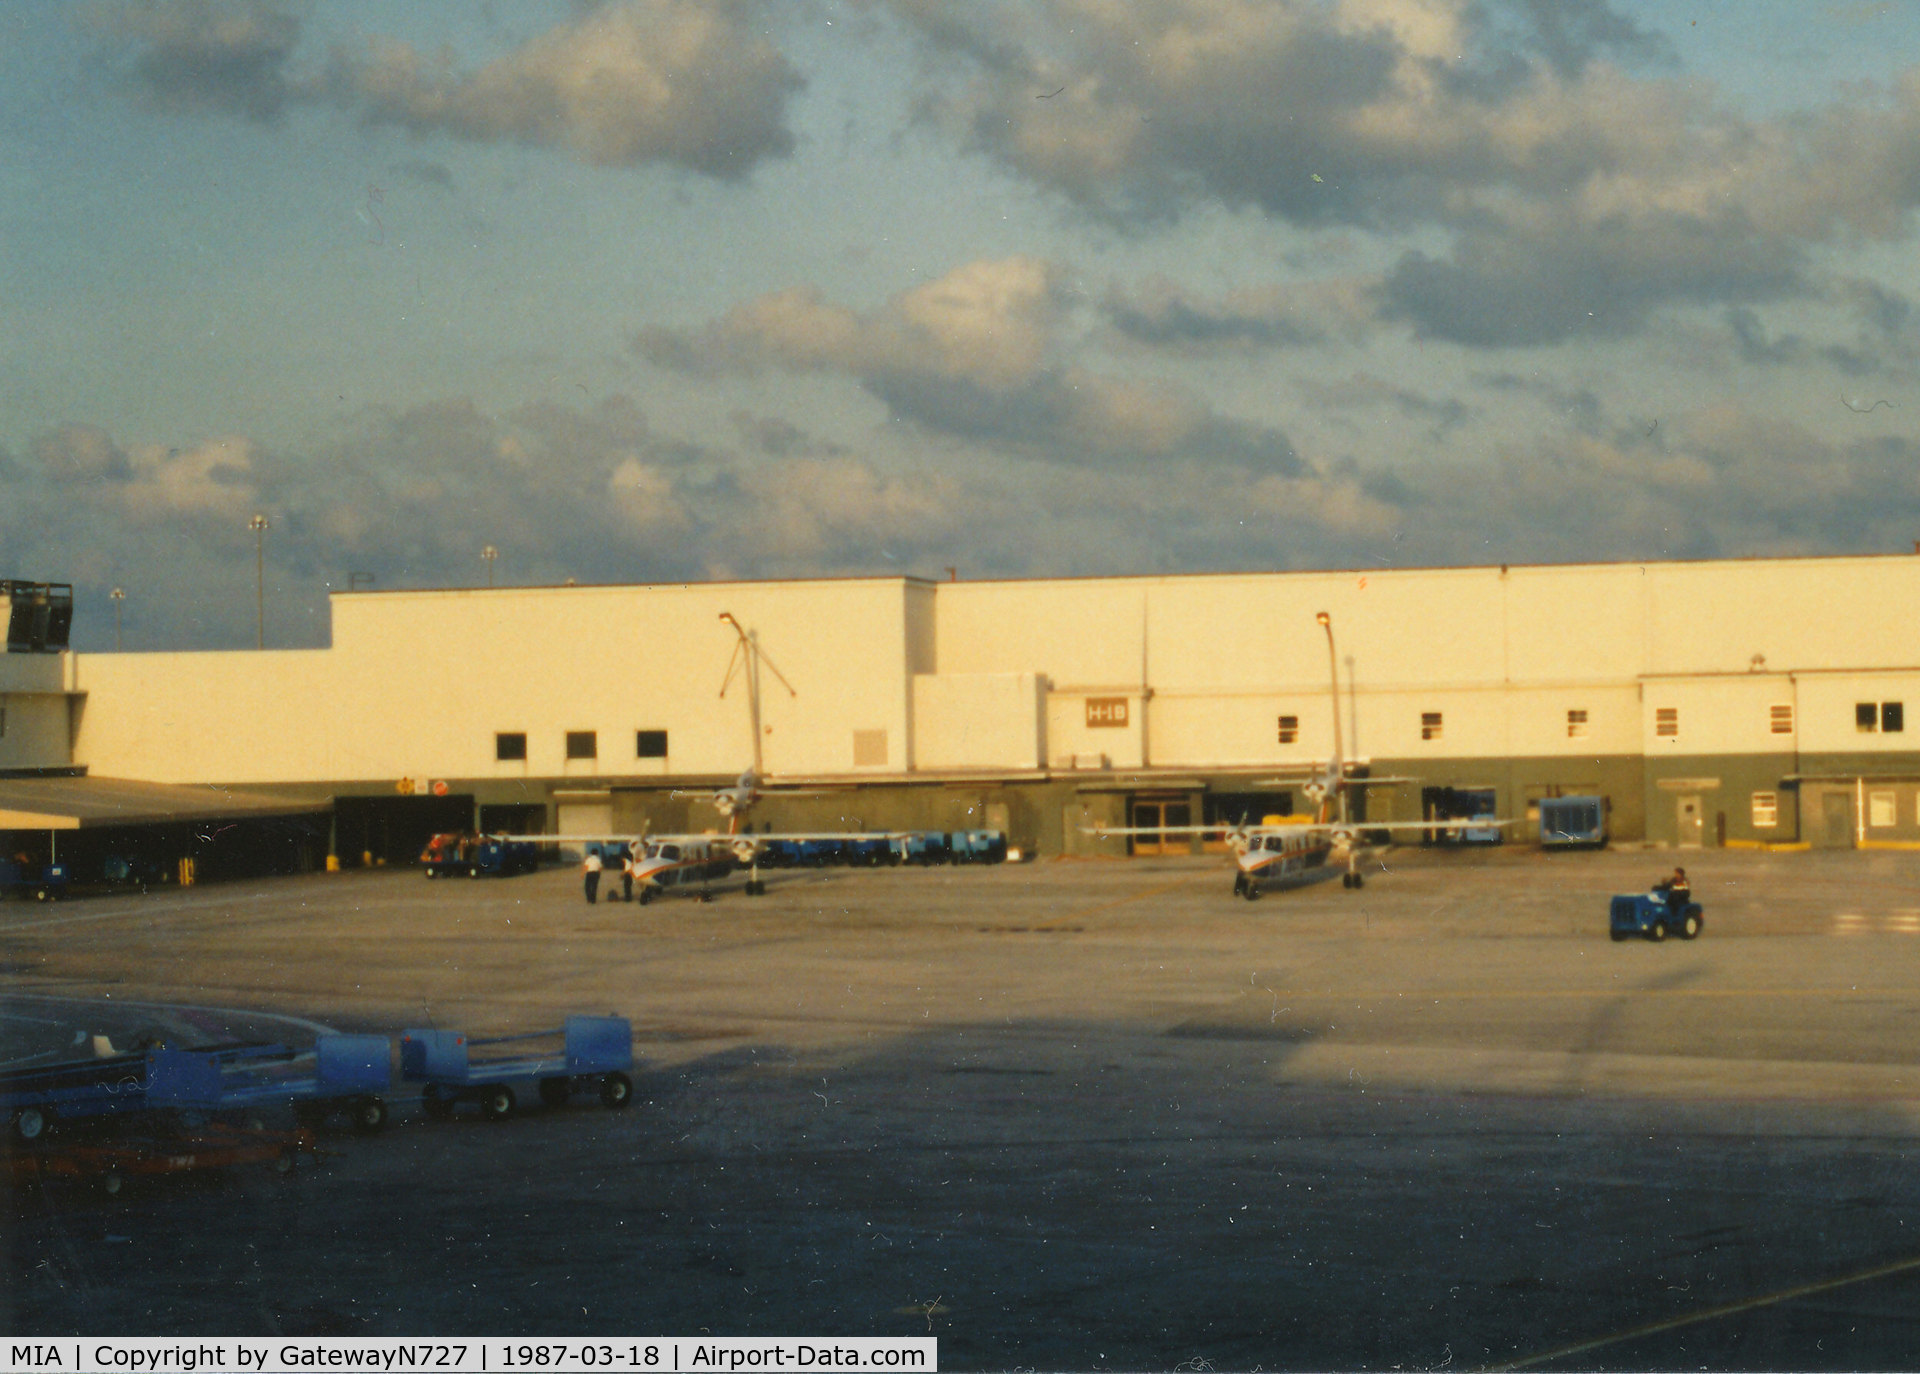 Miami International Airport (MIA) - Air South (of Homestead, FL) Trislanders, N905GD and N906GD, parked at gate H-1B on the old H concourse. Air South ceased oper'ns. 3 months after this photo was taken.